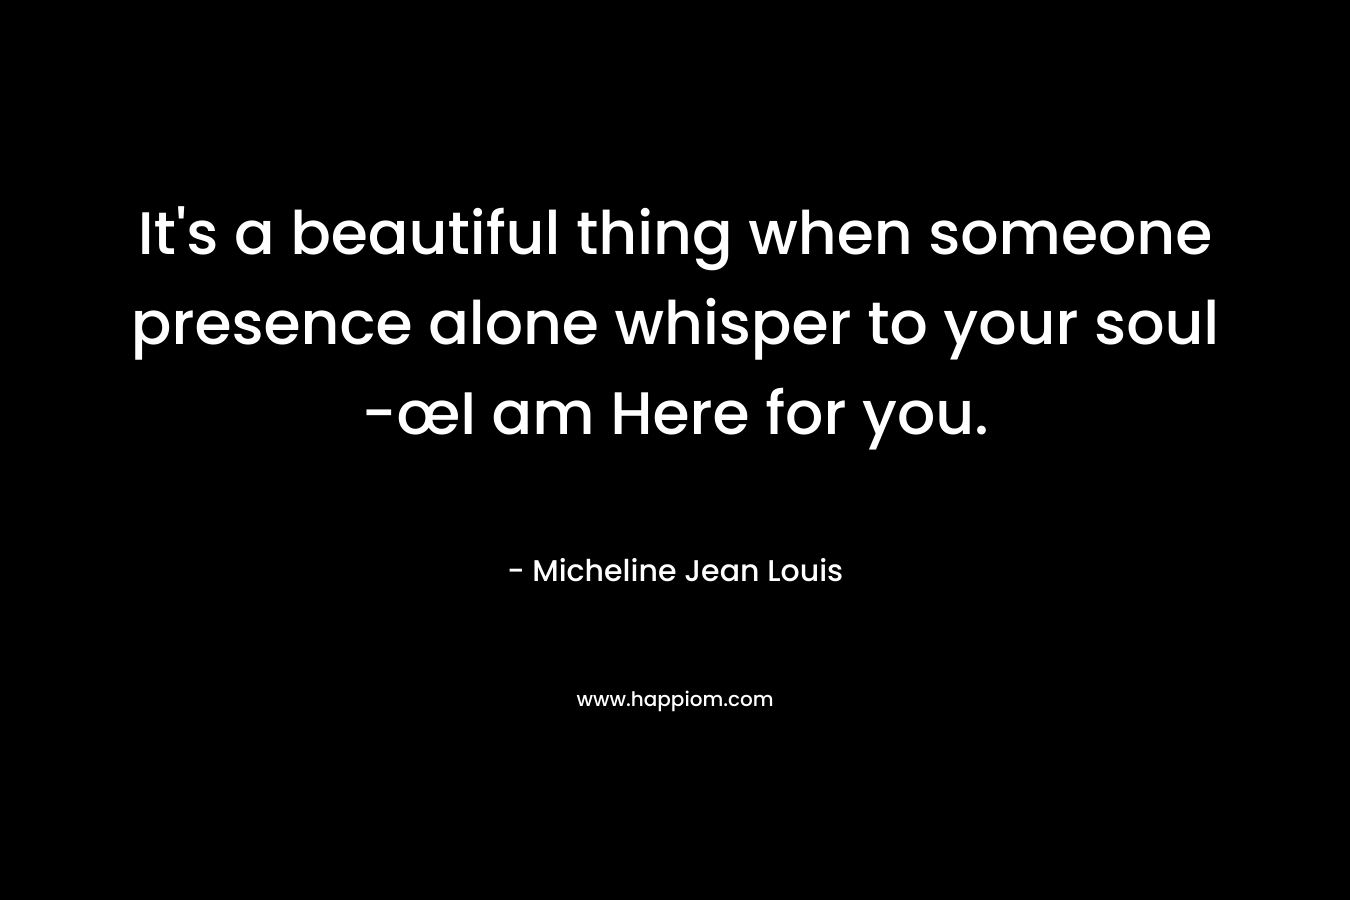 It’s a beautiful thing when someone presence alone whisper to your soul -œI am Here for you. – Micheline Jean Louis